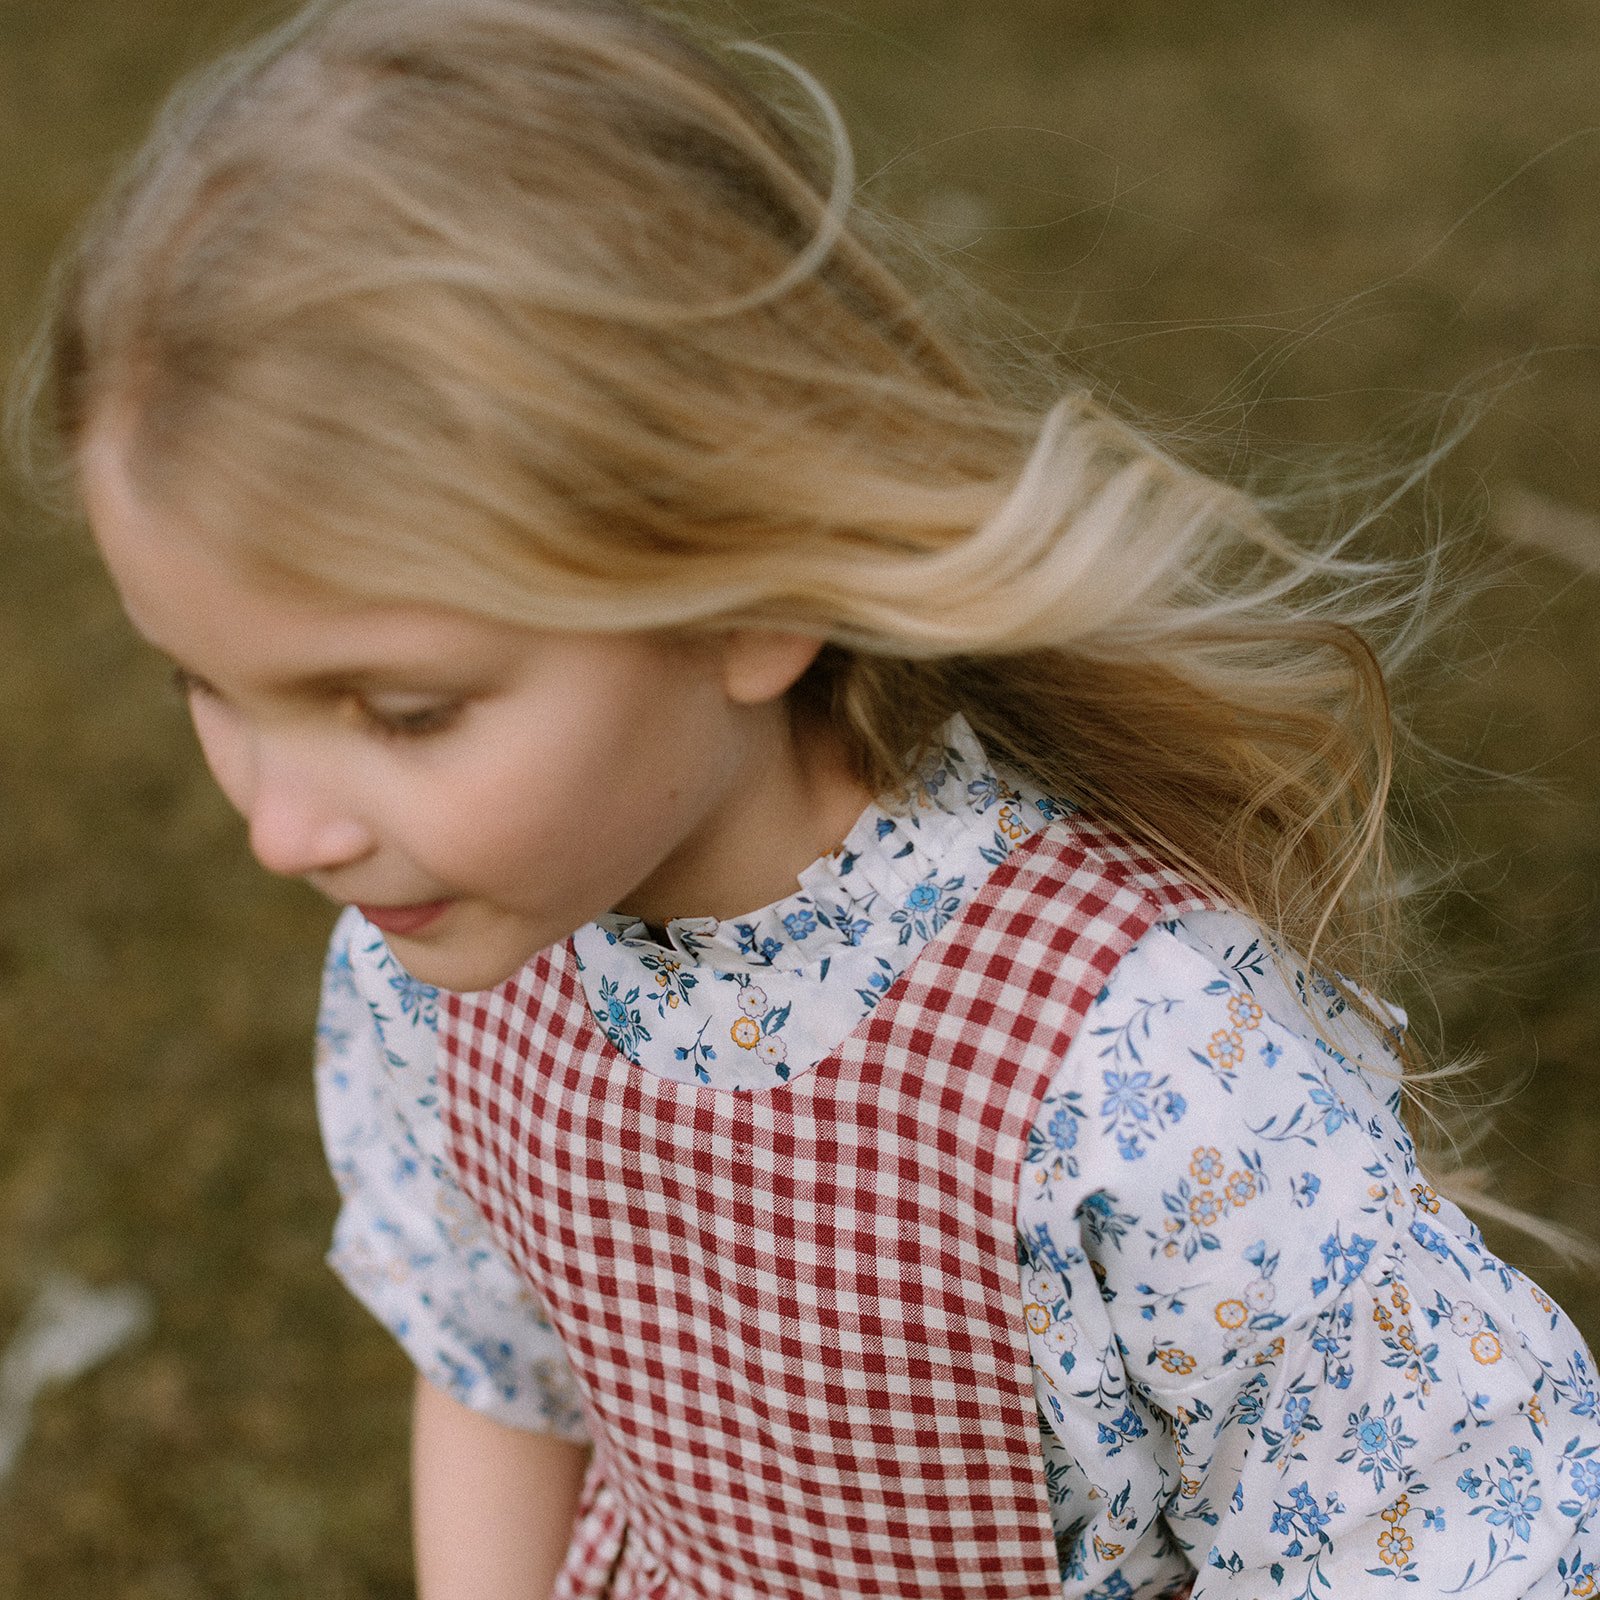  childrenswear fashion photographer girl in red linen gingham smocked dress 